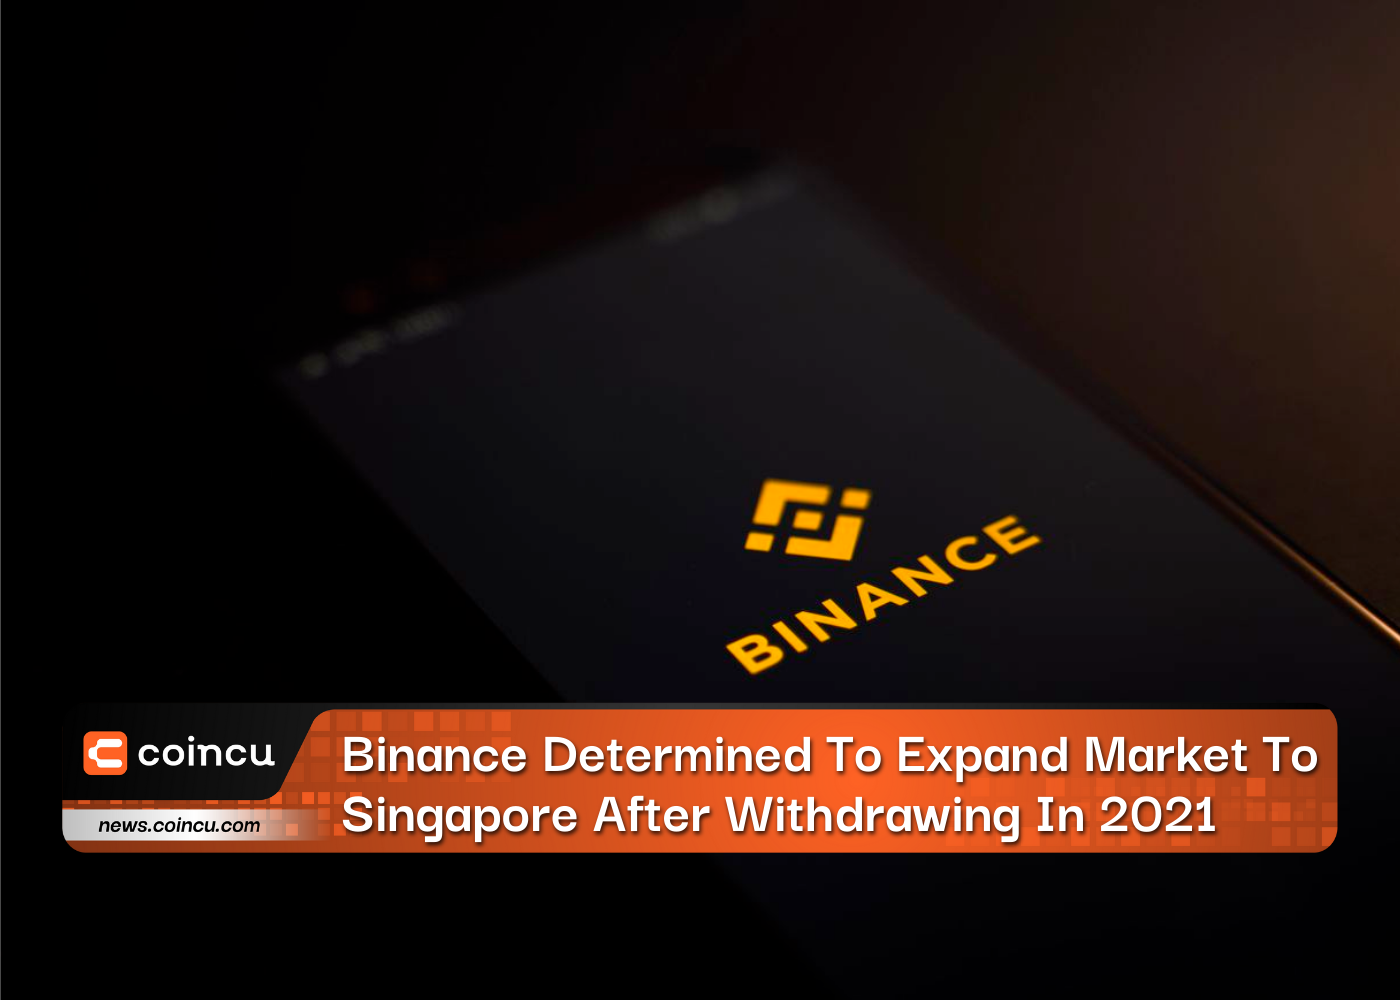 Binance Determined To Expand Market To Singapore After Withdrawing In 2021